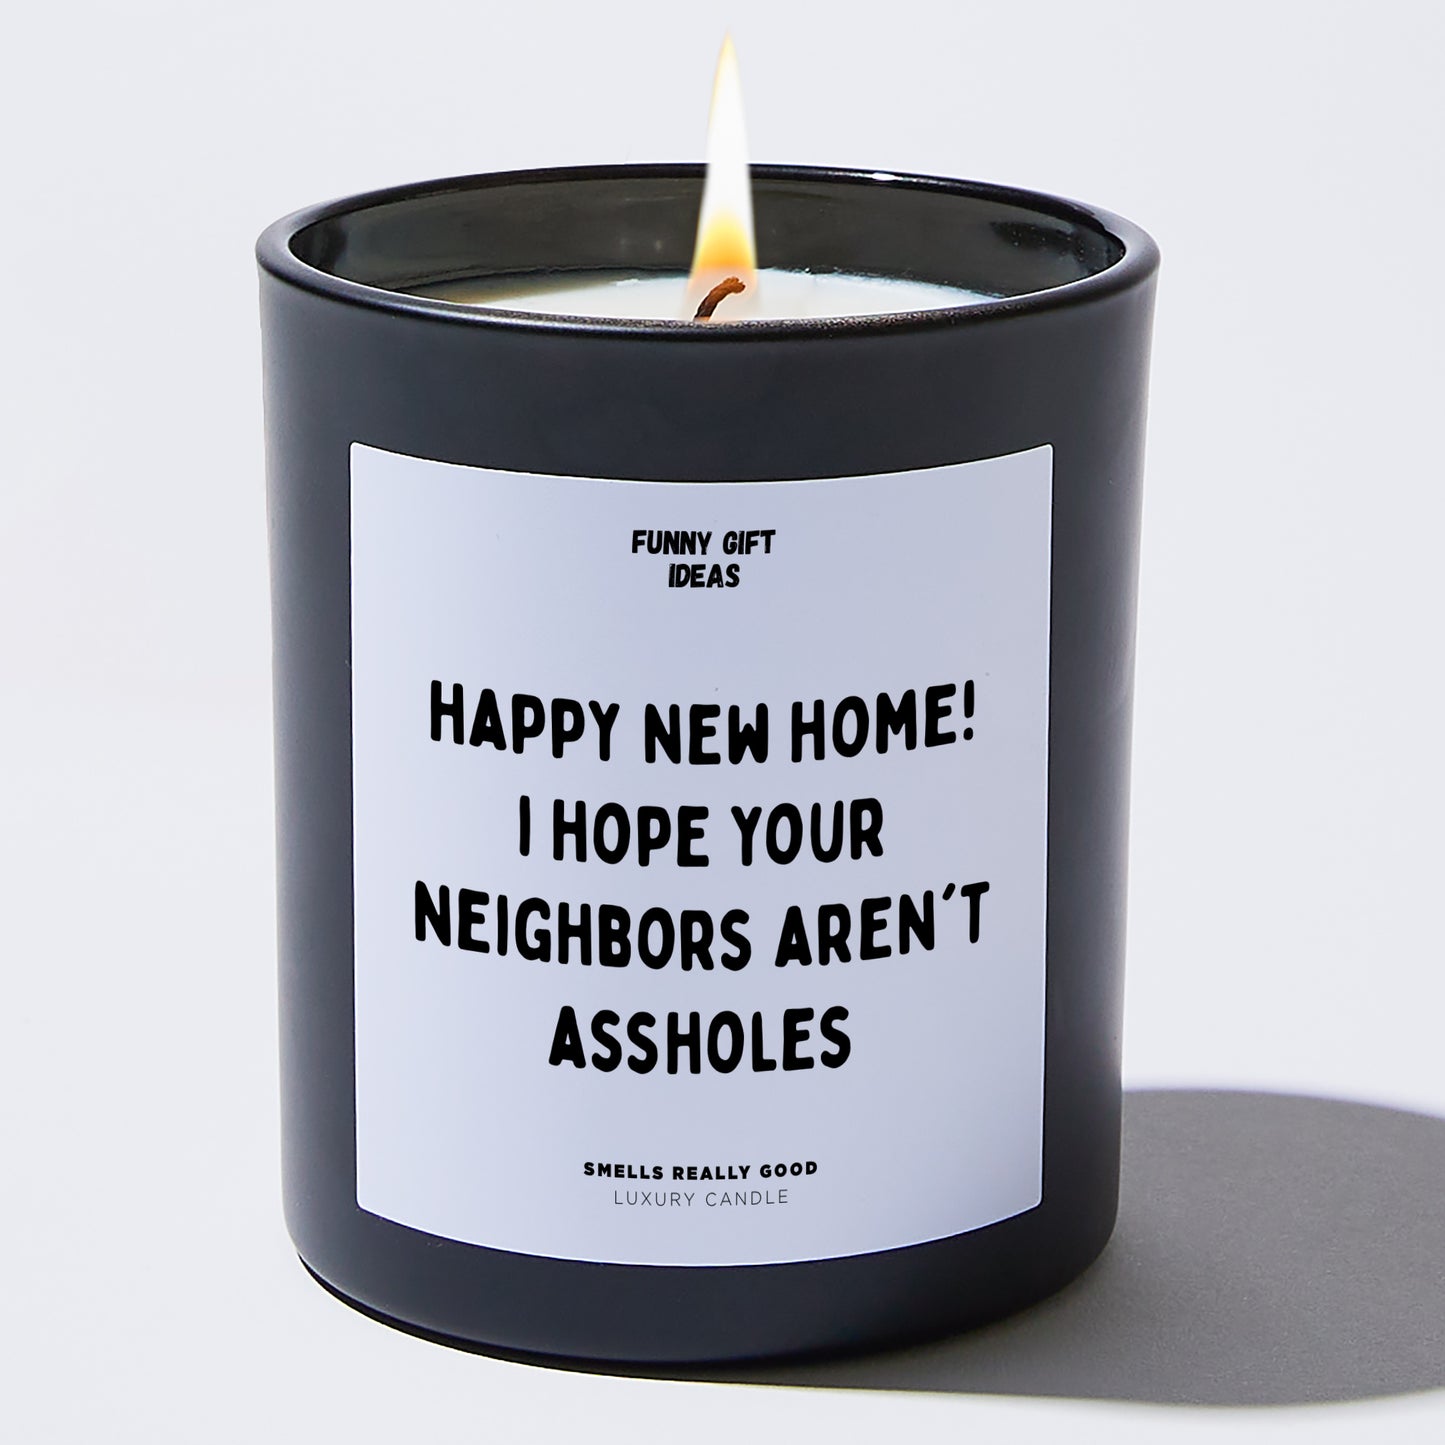 Unique Housewarming Gift - Happy New Home! I Hope Your Neighbors Aren't Assholes - Candle